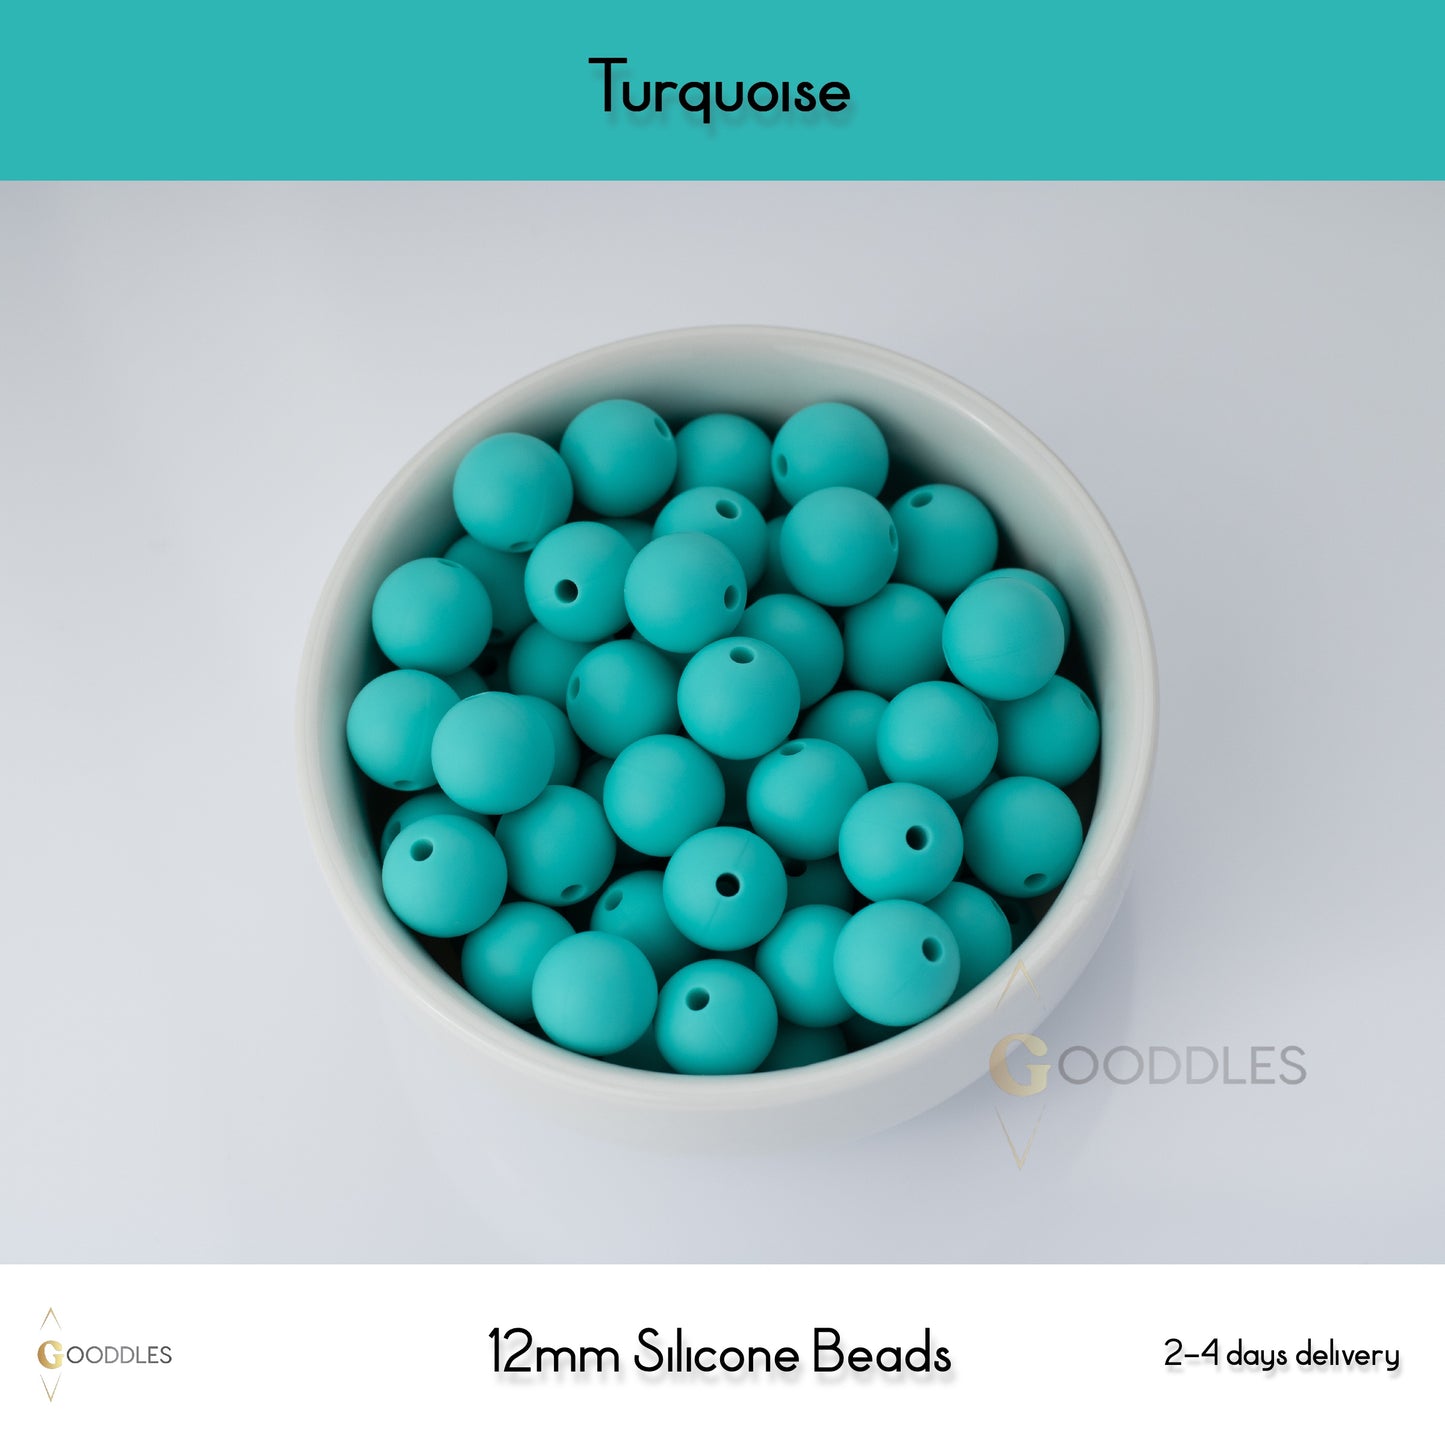 5pcs, Turquoise Silicone Beads Round Silicone Beads